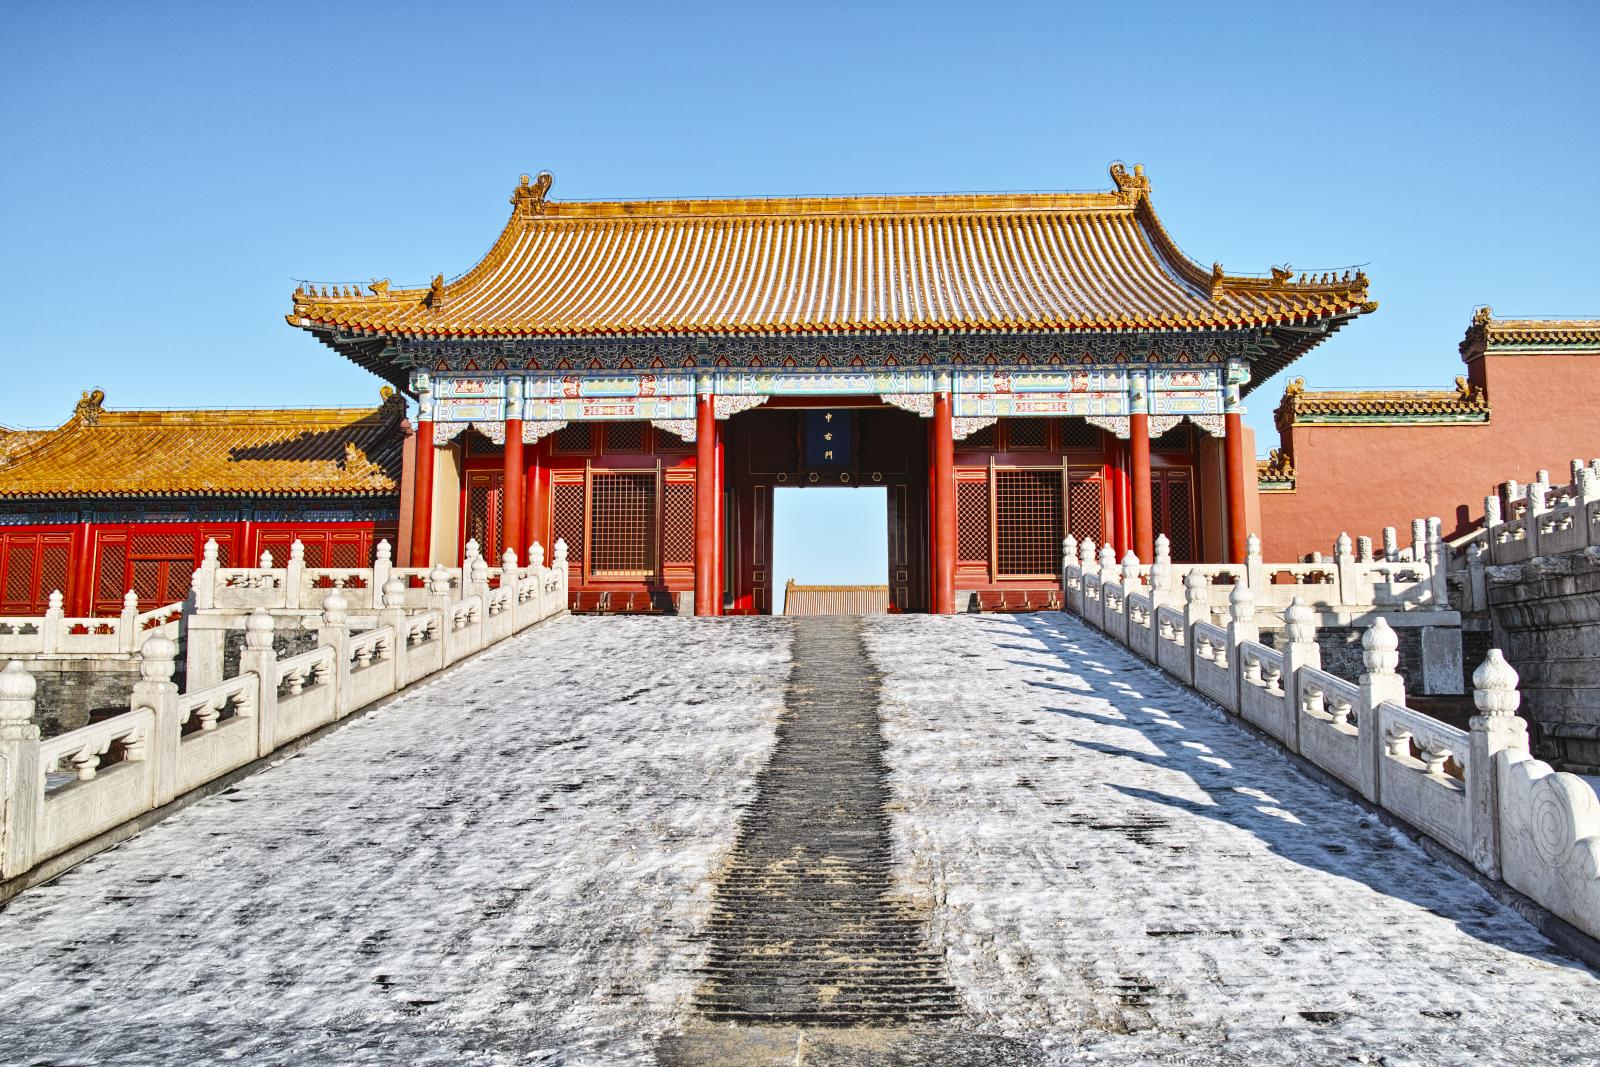 Beijing 2022. Cold, yet another Winter Olympics with artificial snow